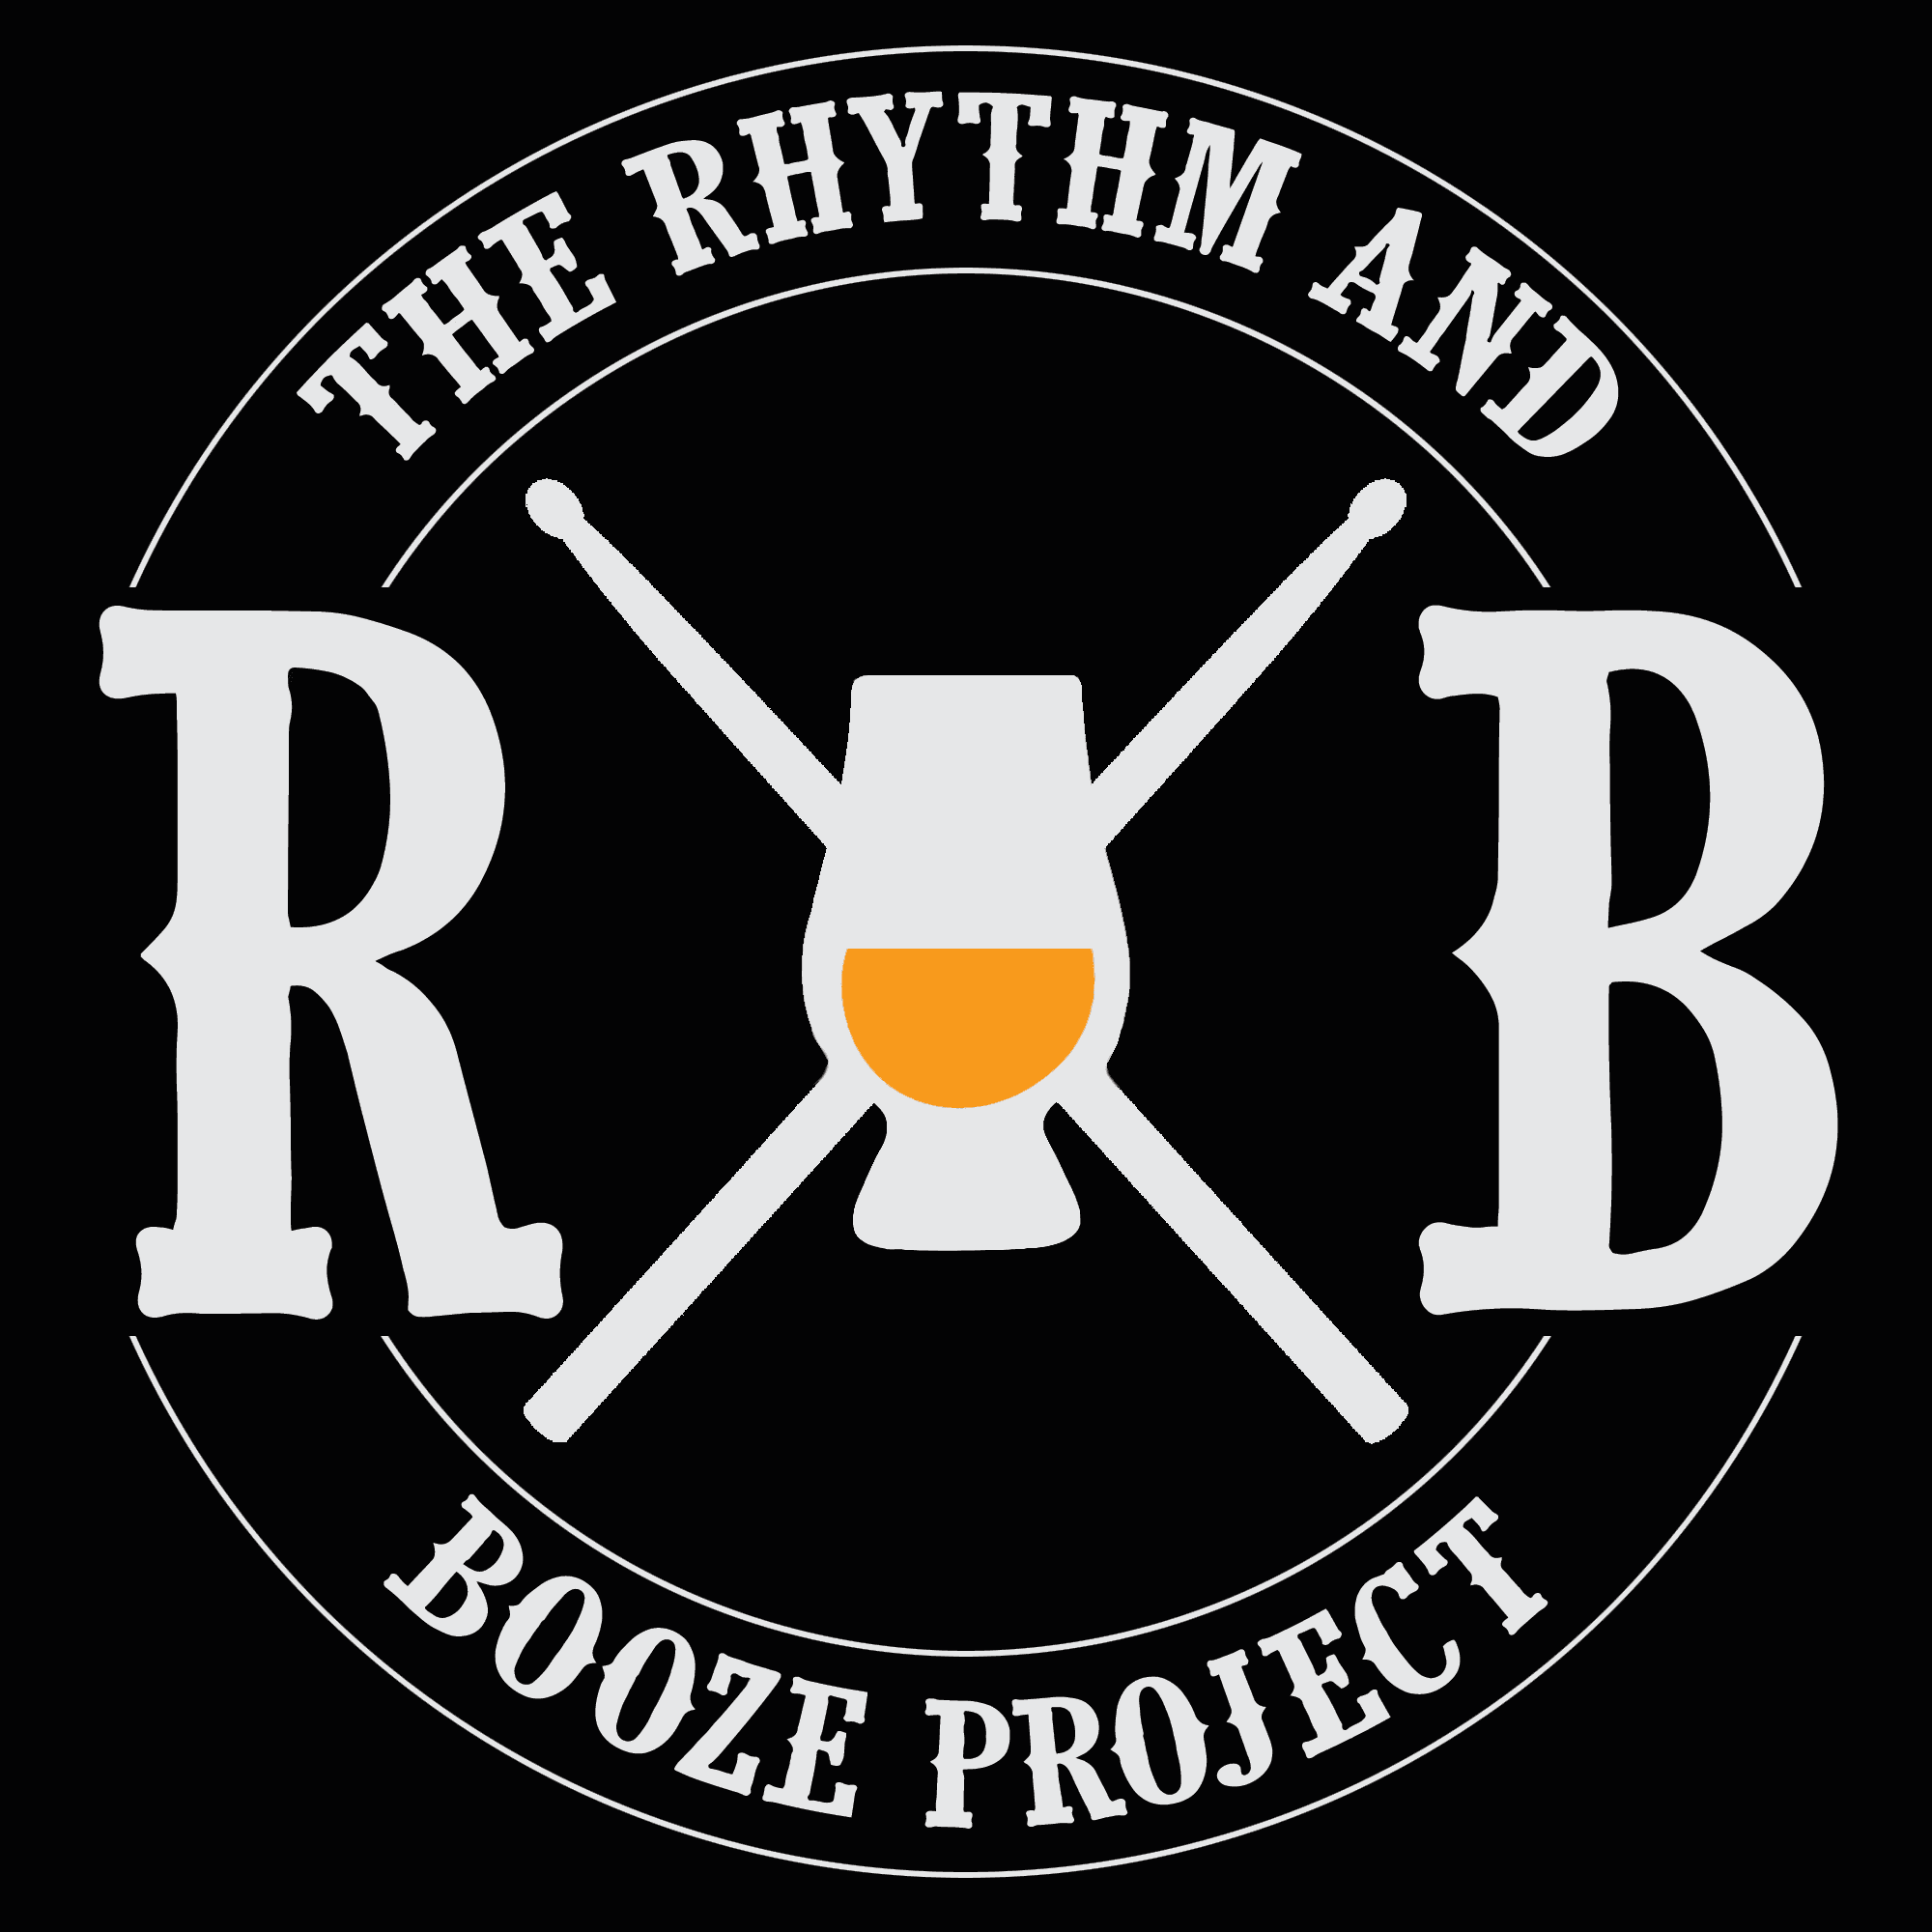 The Rhythm And Booze Project